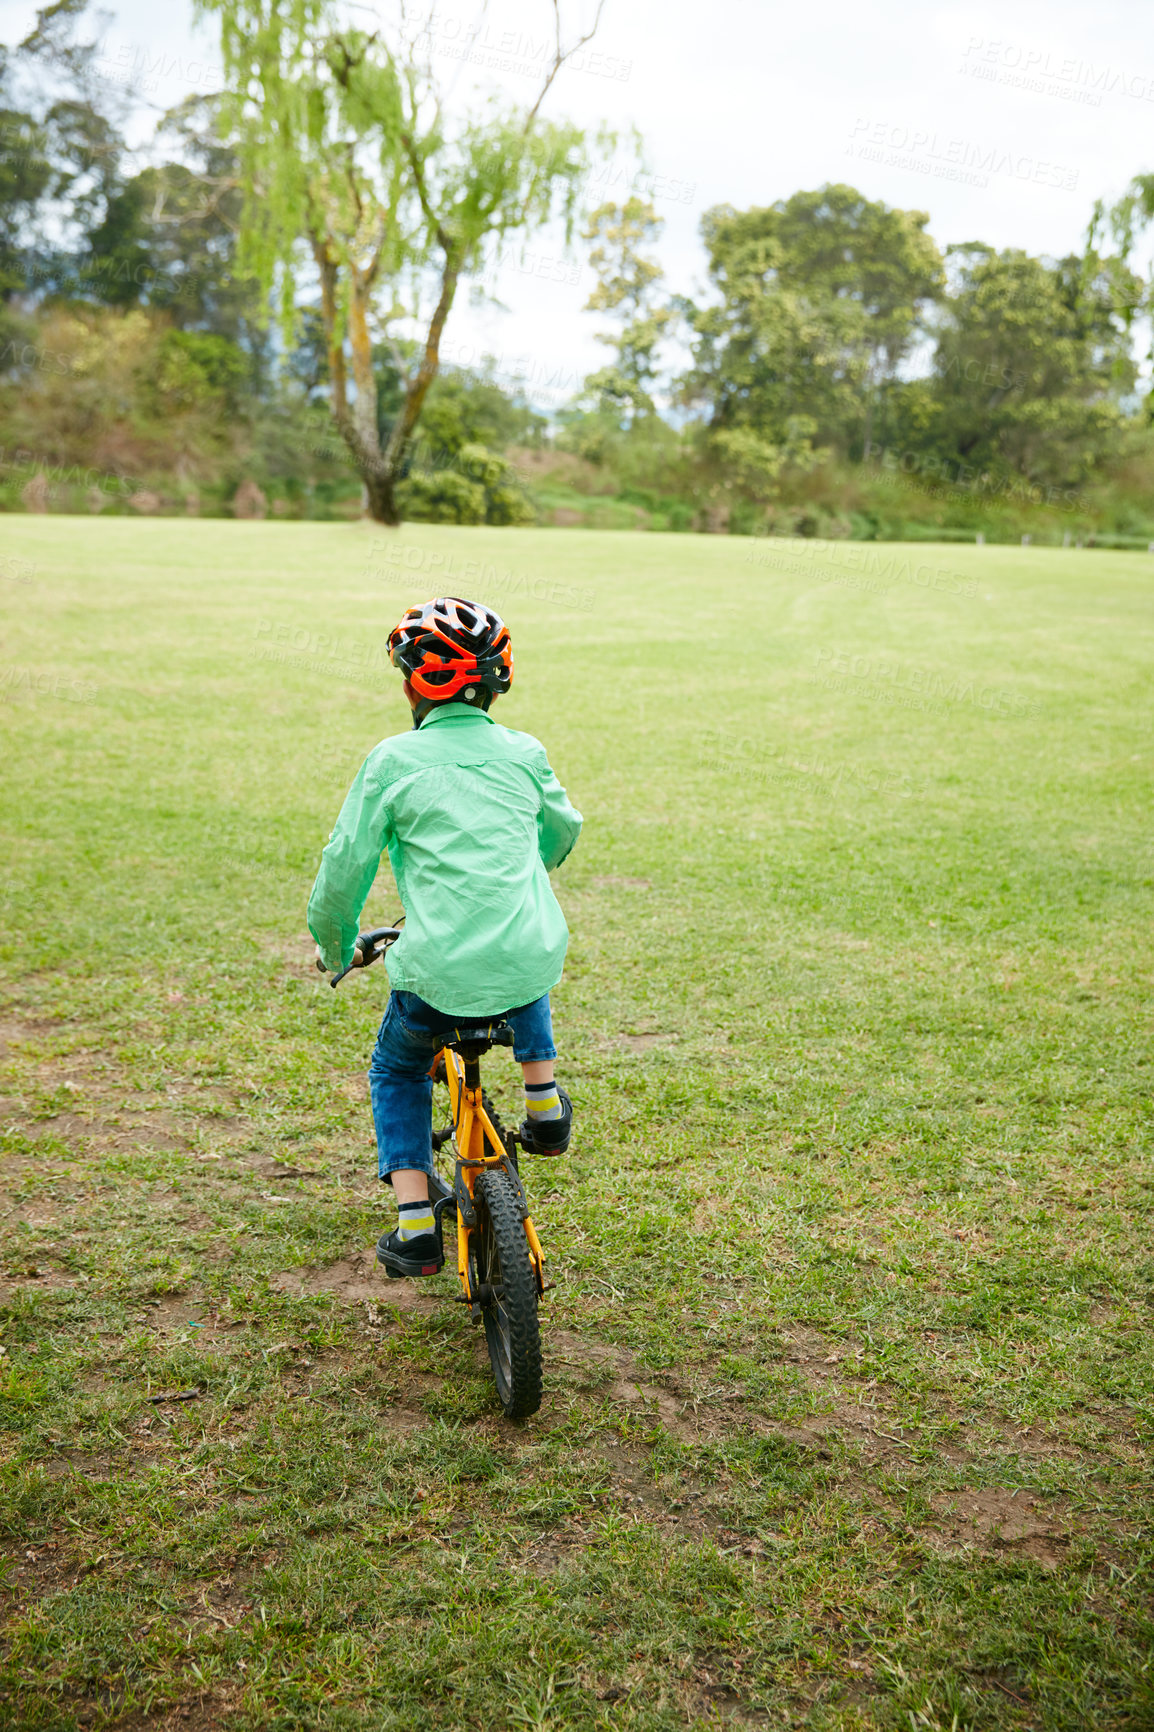 Buy stock photo Rearveiw shot of a young boy riding his bike in a park